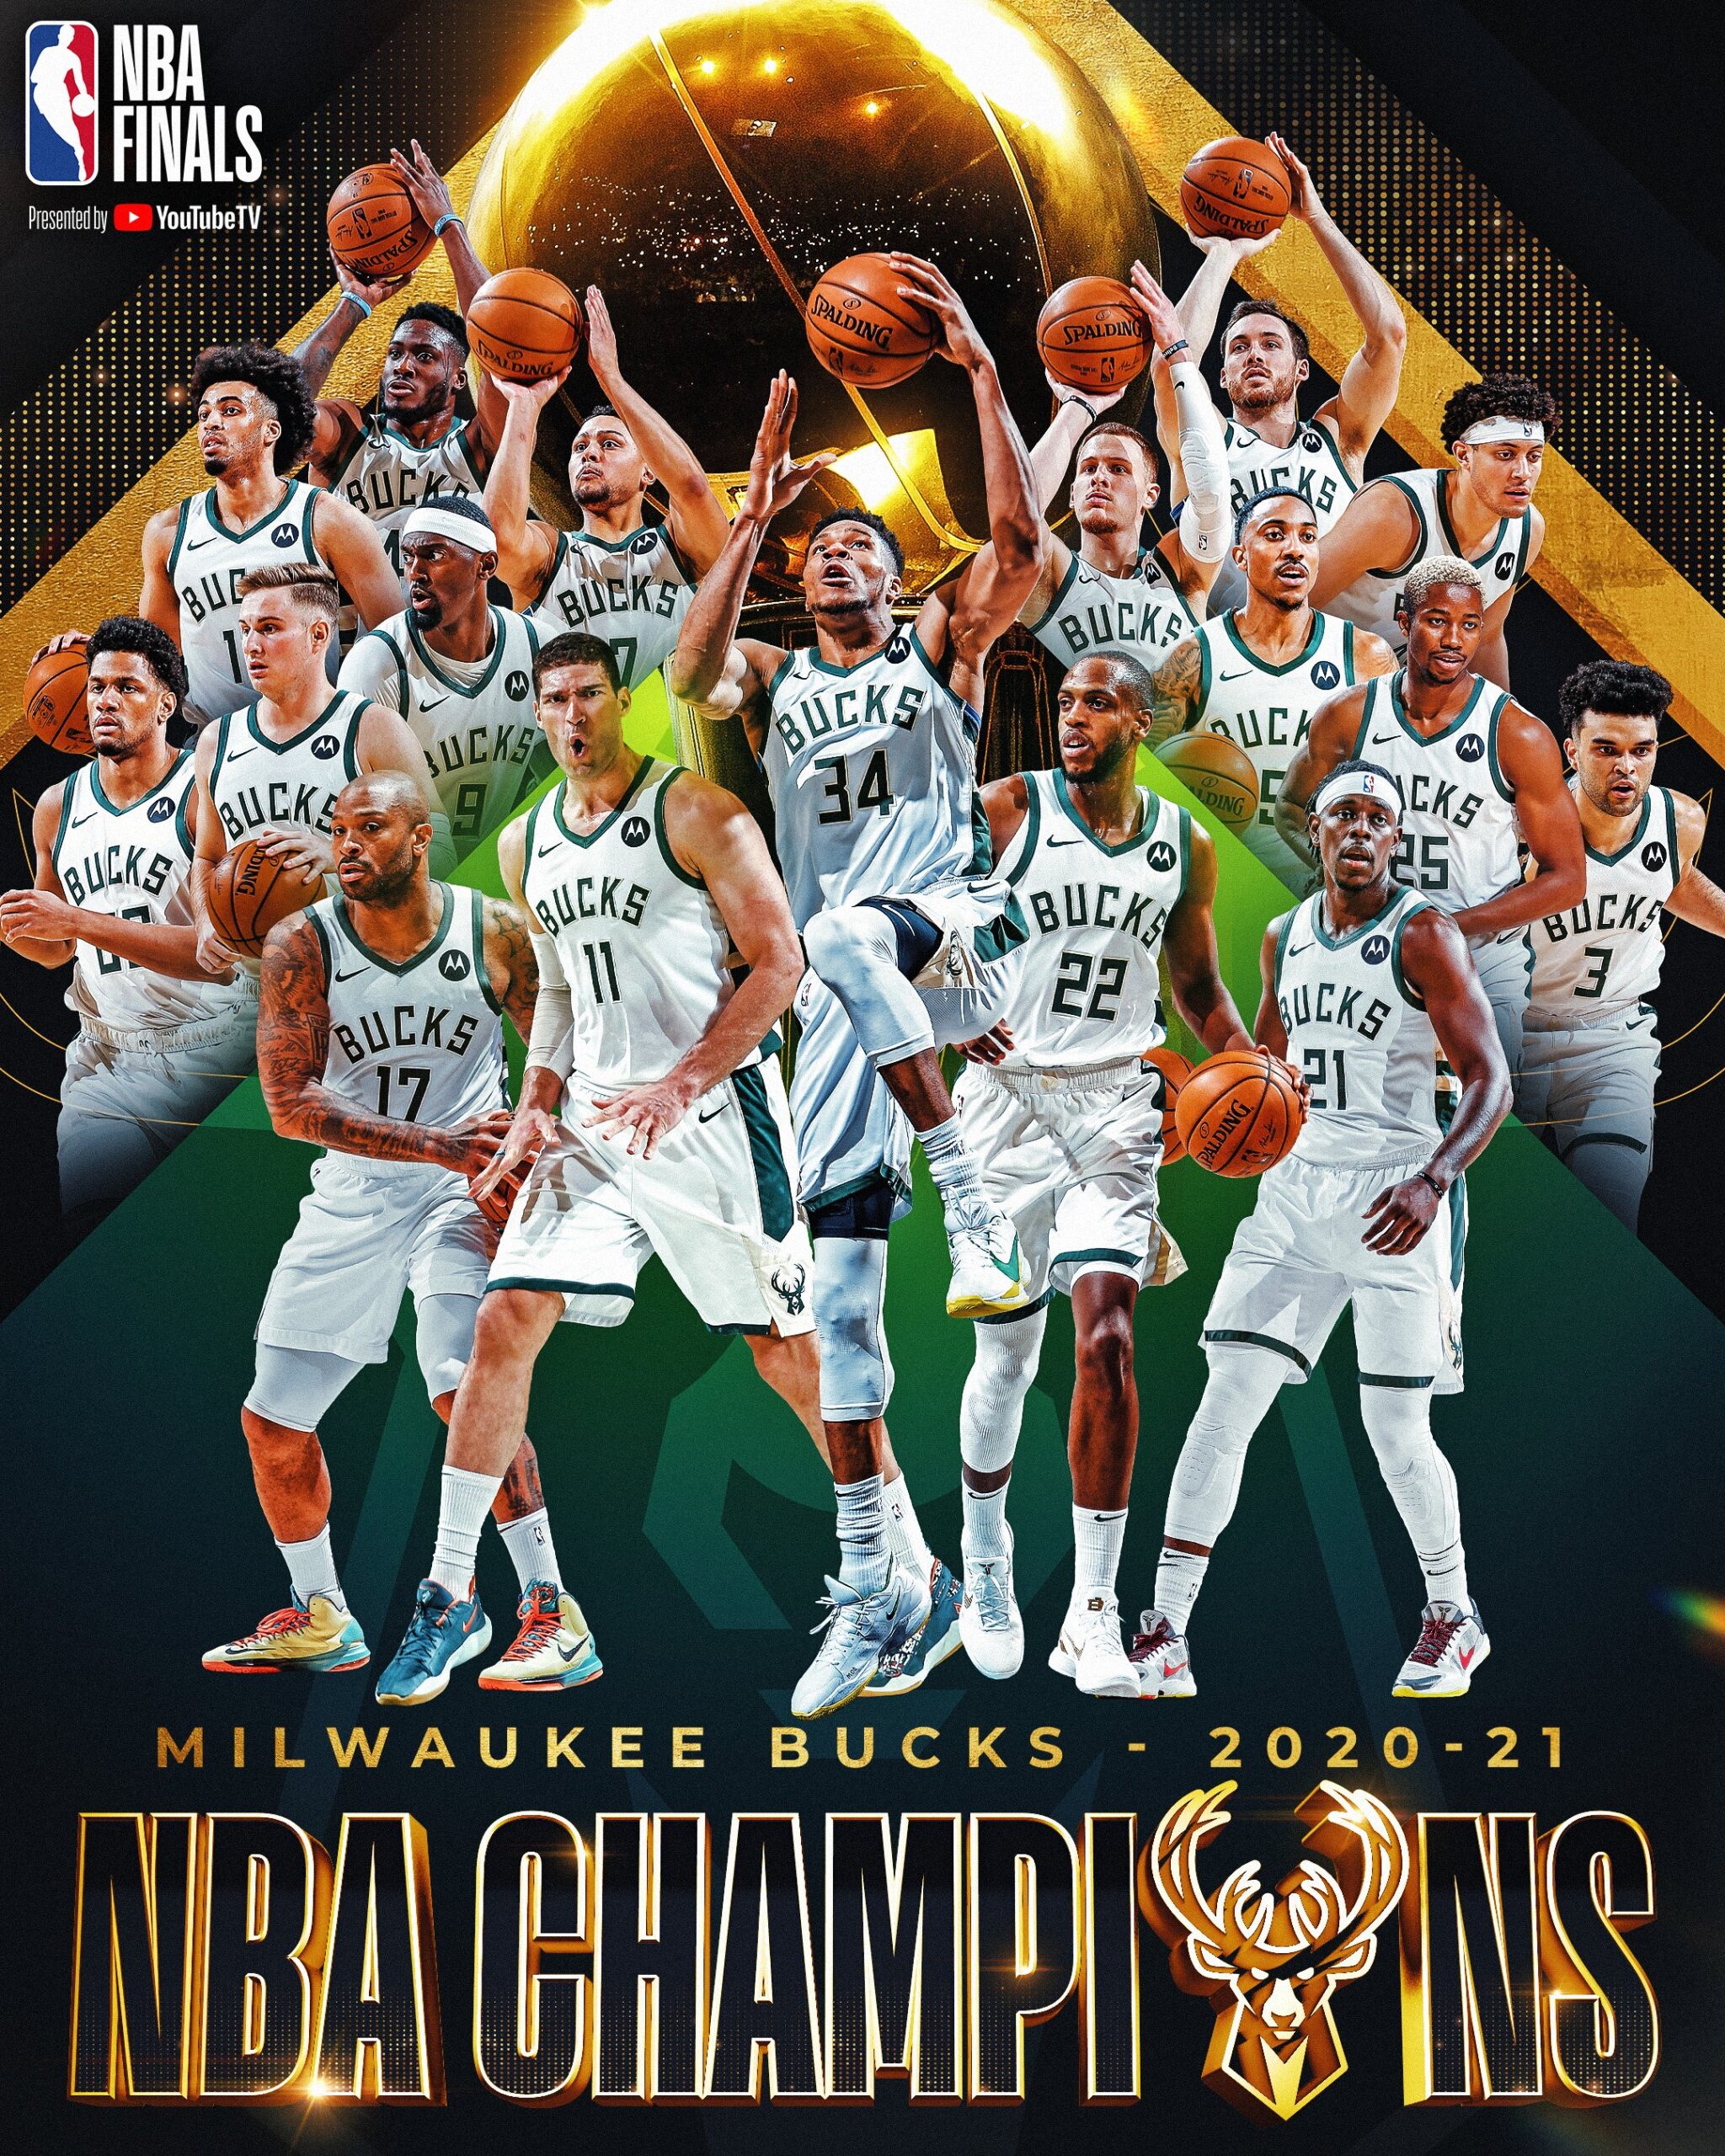 Bucks wins 2021 Championship after defeating Suns 10598 in Game 6